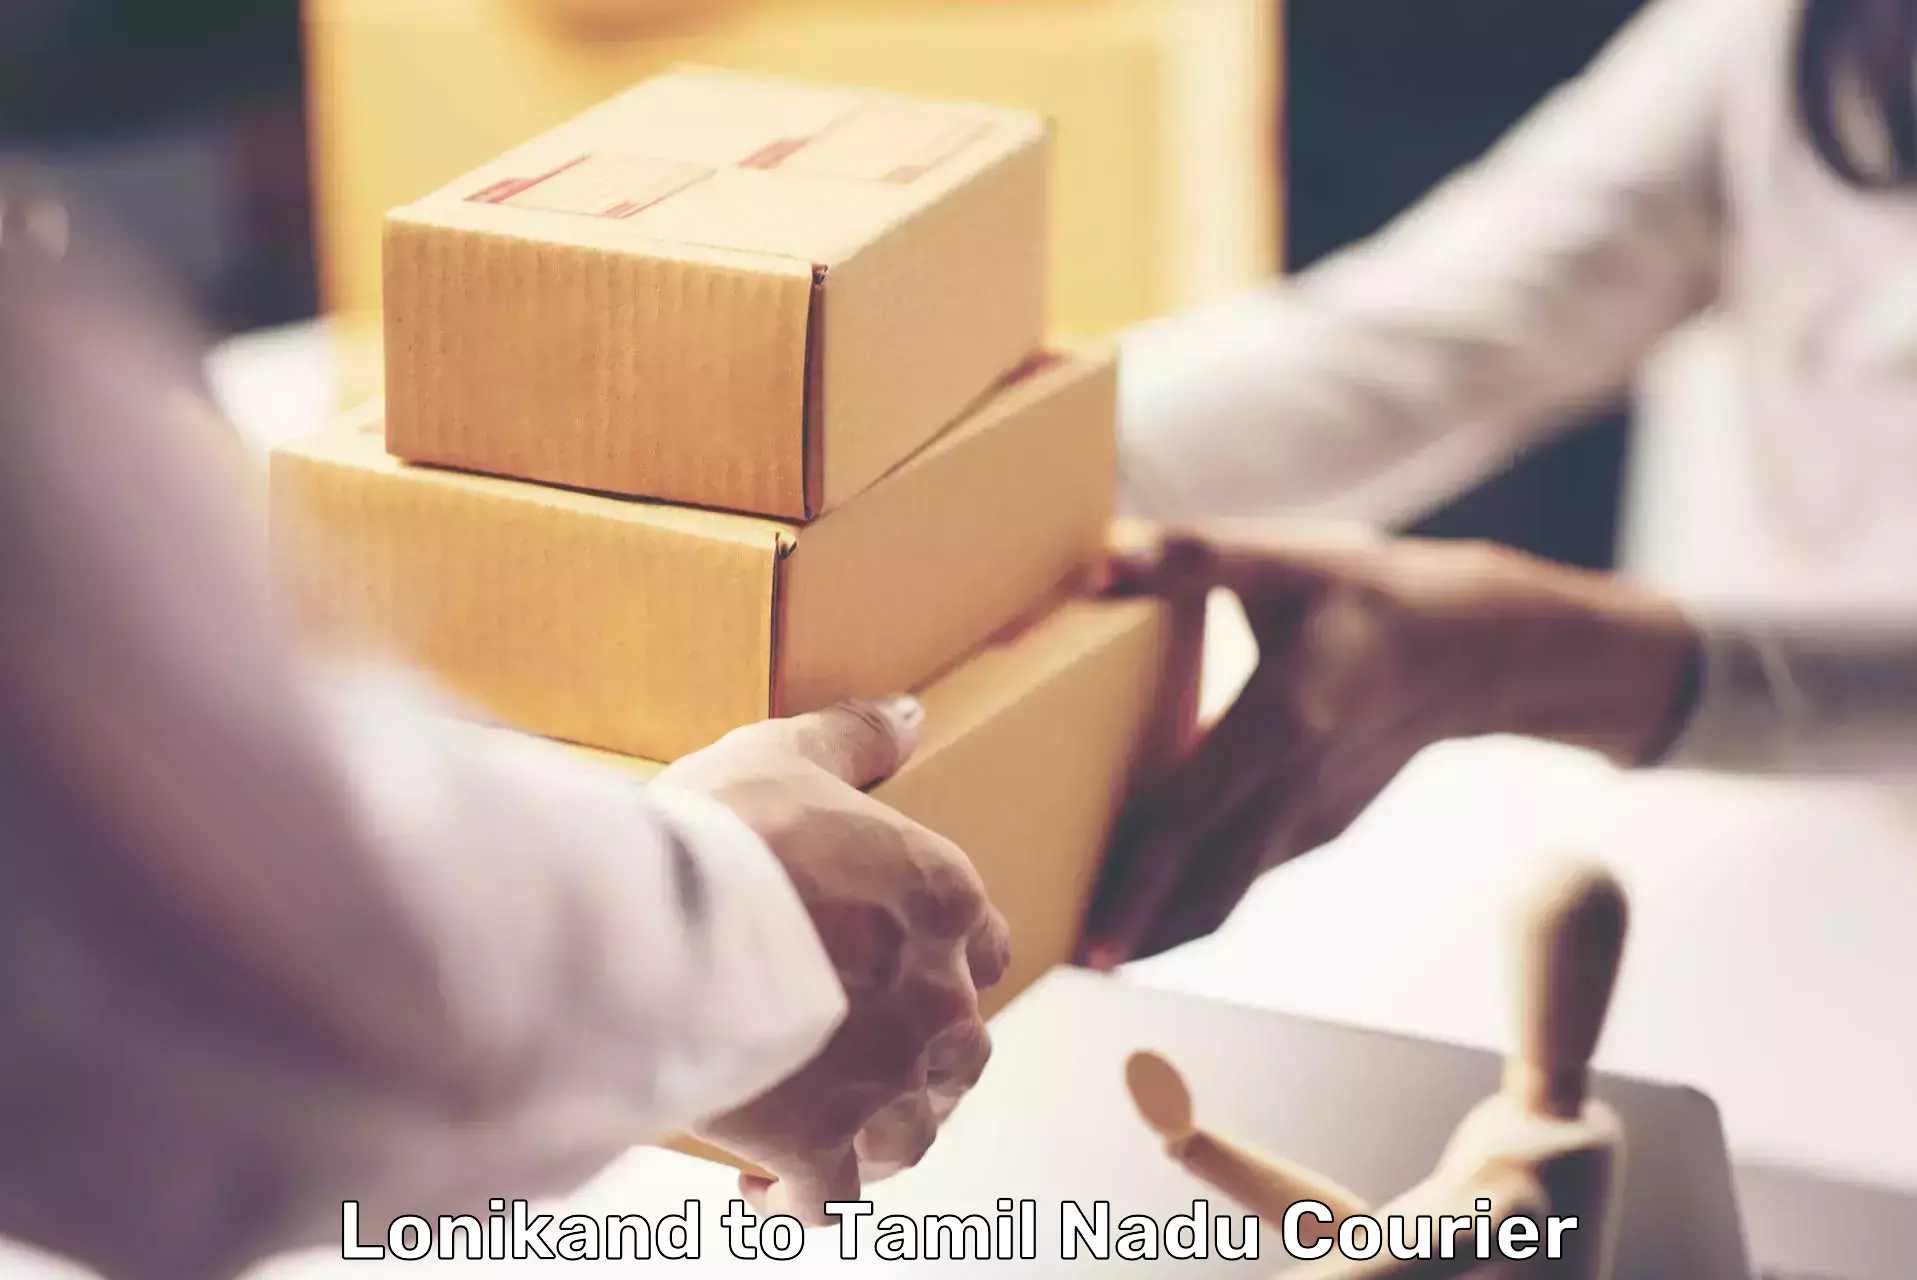 Parcel handling and care Lonikand to Tamil Nadu